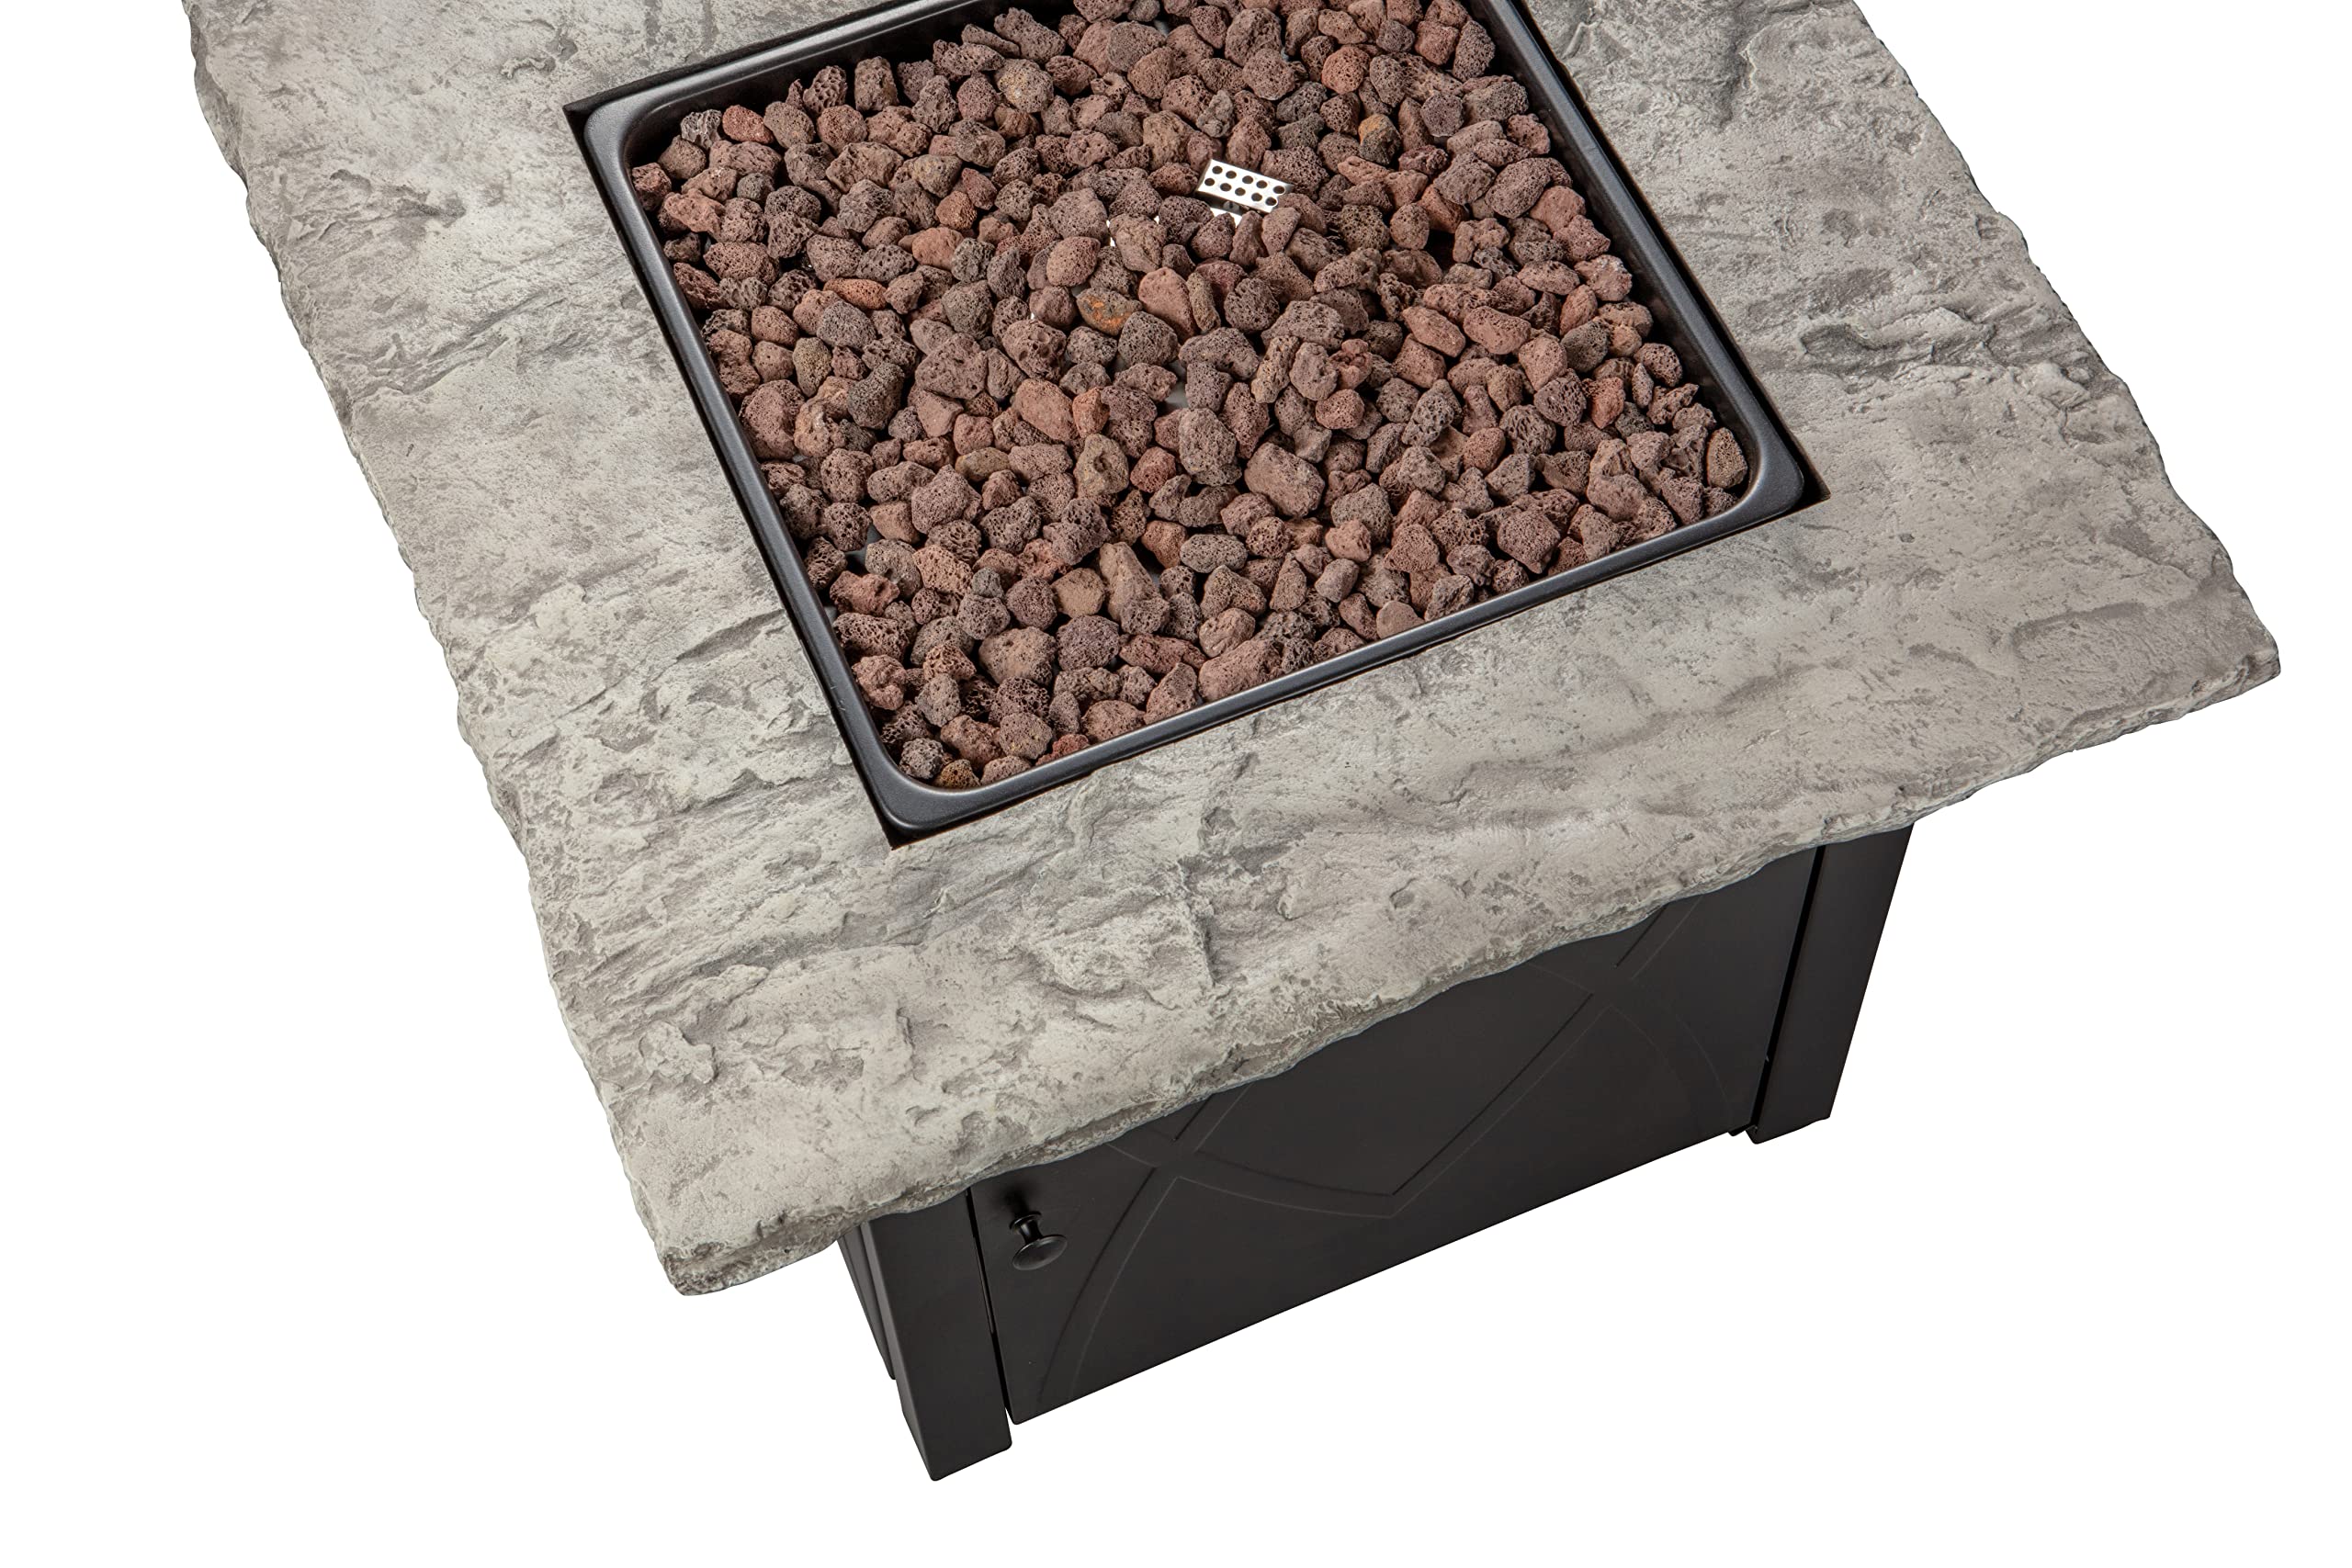 Endless Summer GAD1445DH Propane Gas Outdoor Fire Table, Brown